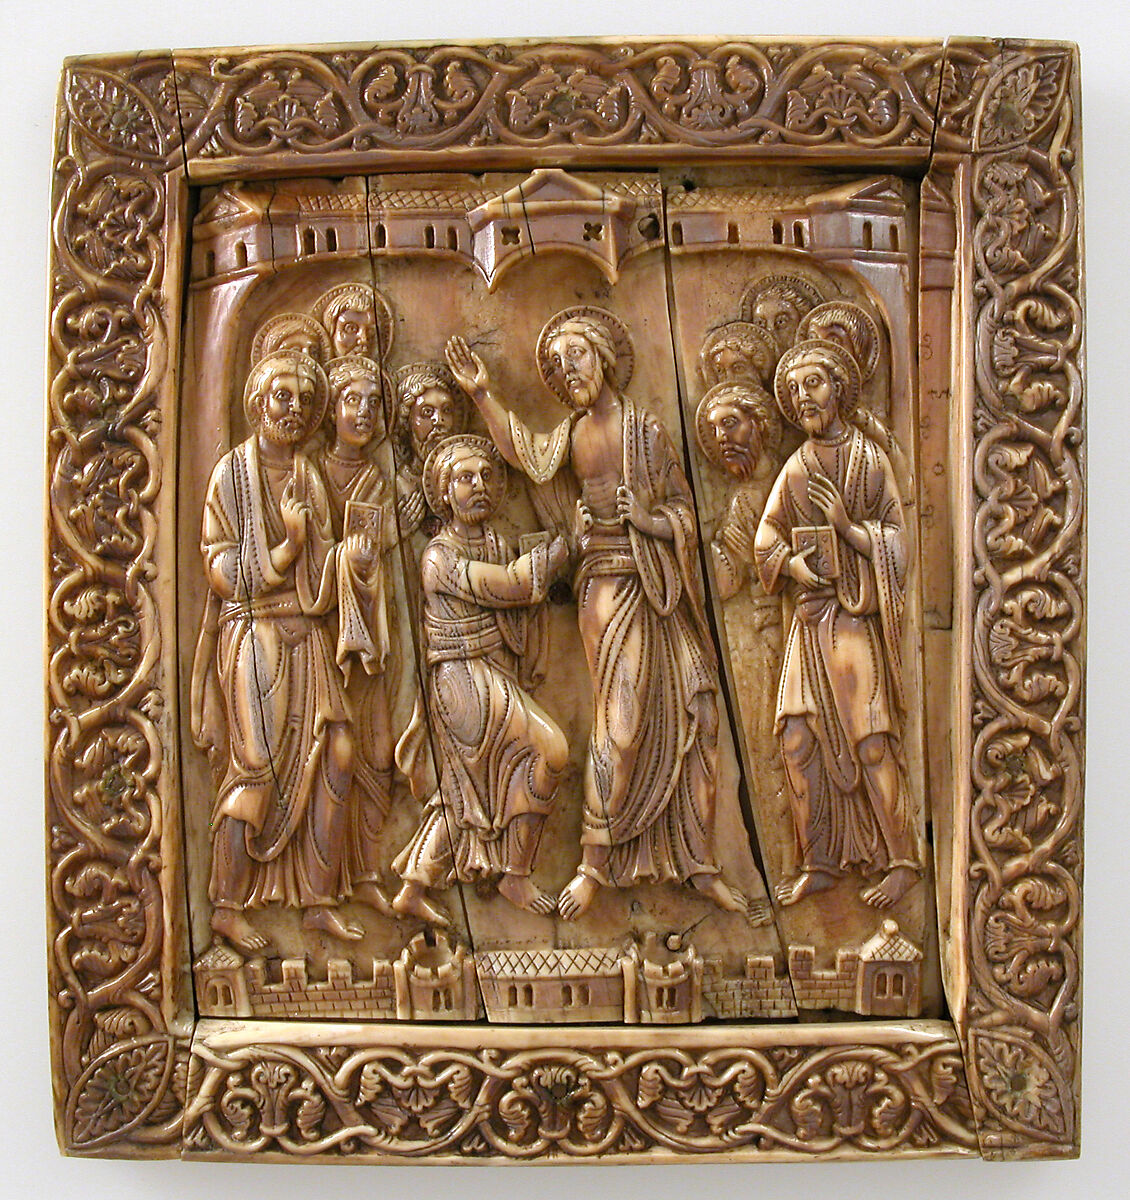 Plaque with Doubting Thomas, Walrus ivory, German